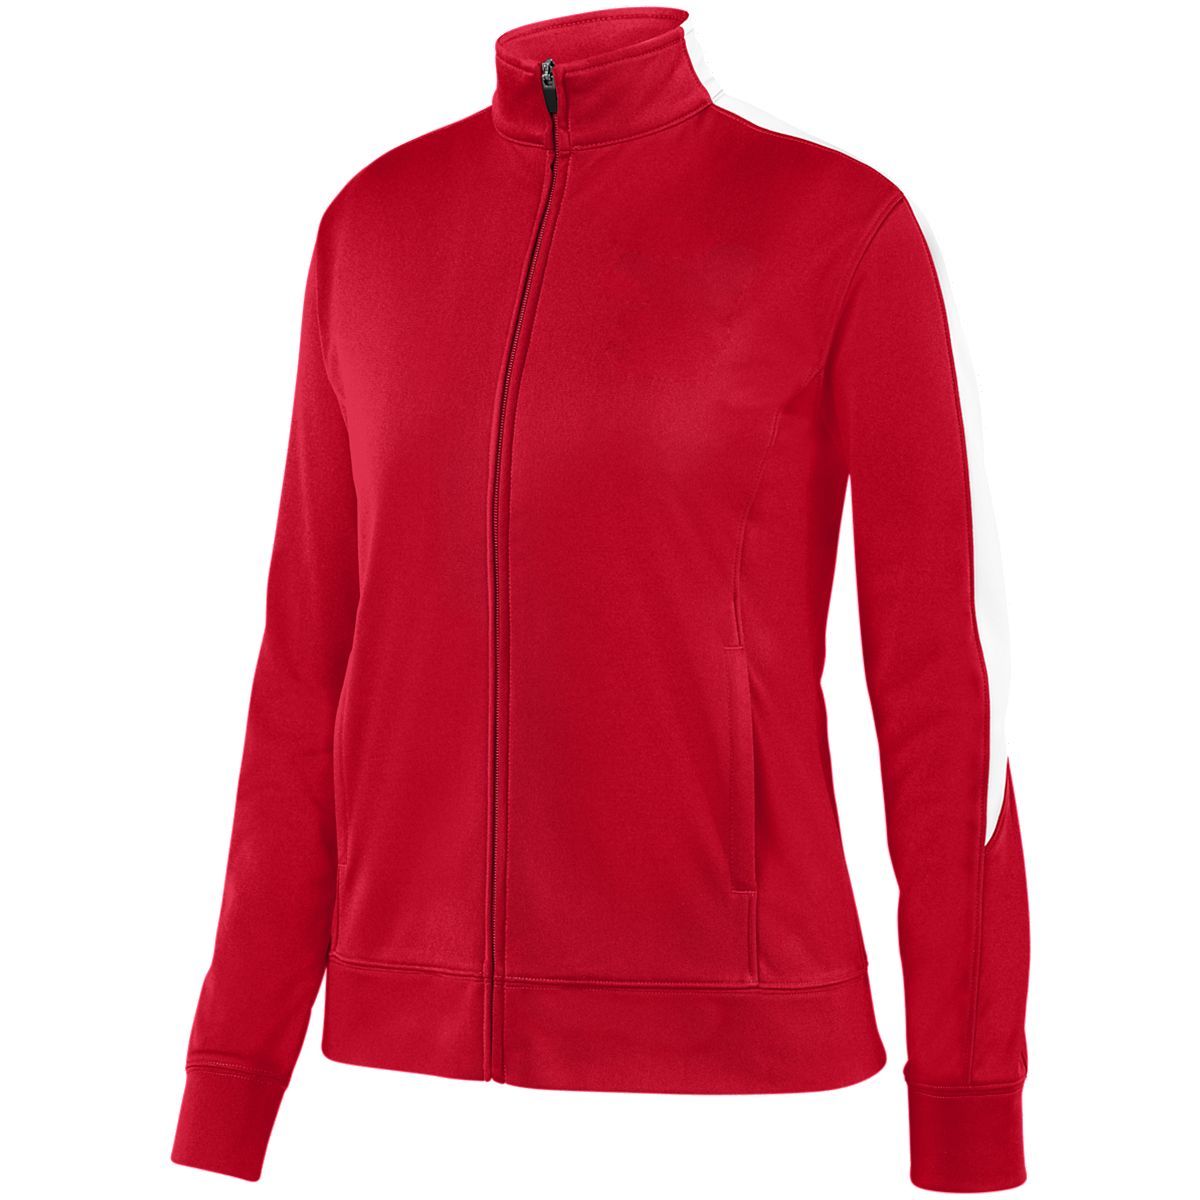 Augusta Sportswear Ladies Medalist Jacket 2.0 in Red/White  -Part of the Ladies, Ladies-Jacket, Augusta-Products, Outerwear product lines at KanaleyCreations.com